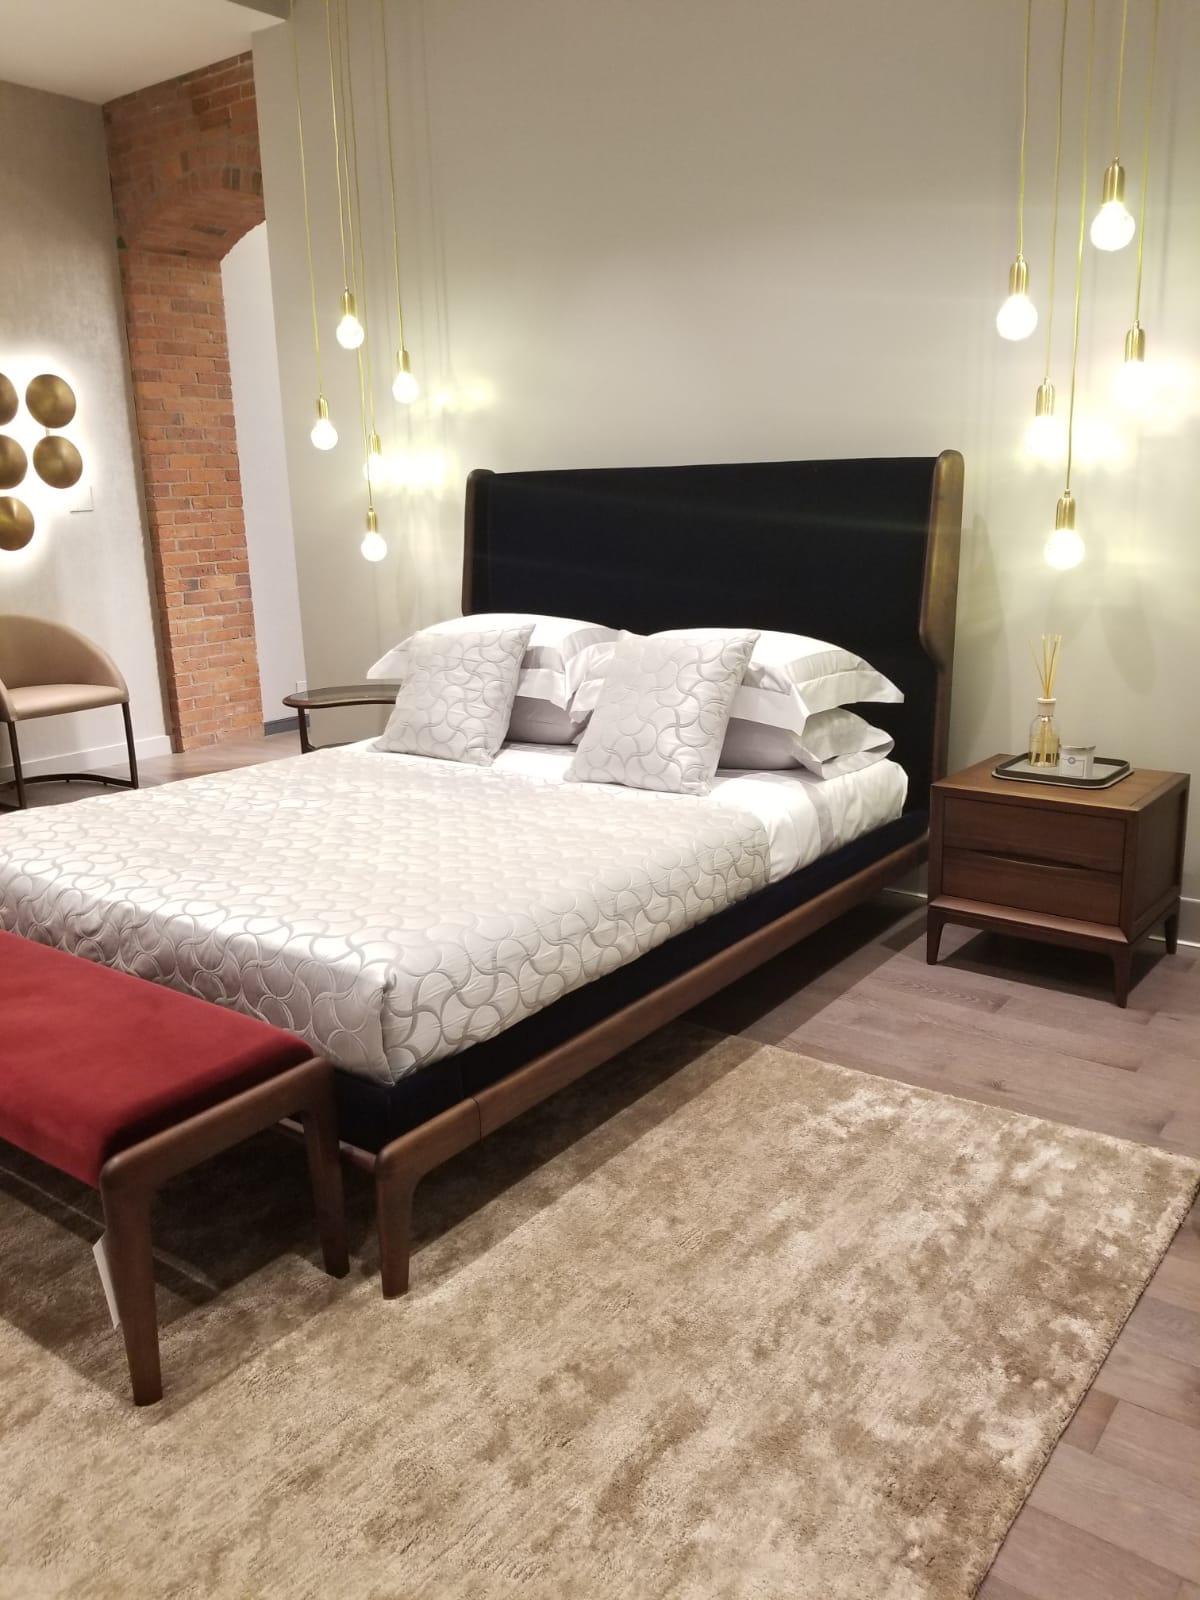 This product is currently on showroom display. 

Ceccotti Collezioni sleeping muse designed by Roberto Lazzeroni 
Queen size bed made in dark solid American walnut, bed base in veneered plywood, upholstered headboard and bed fascia, covered in navy